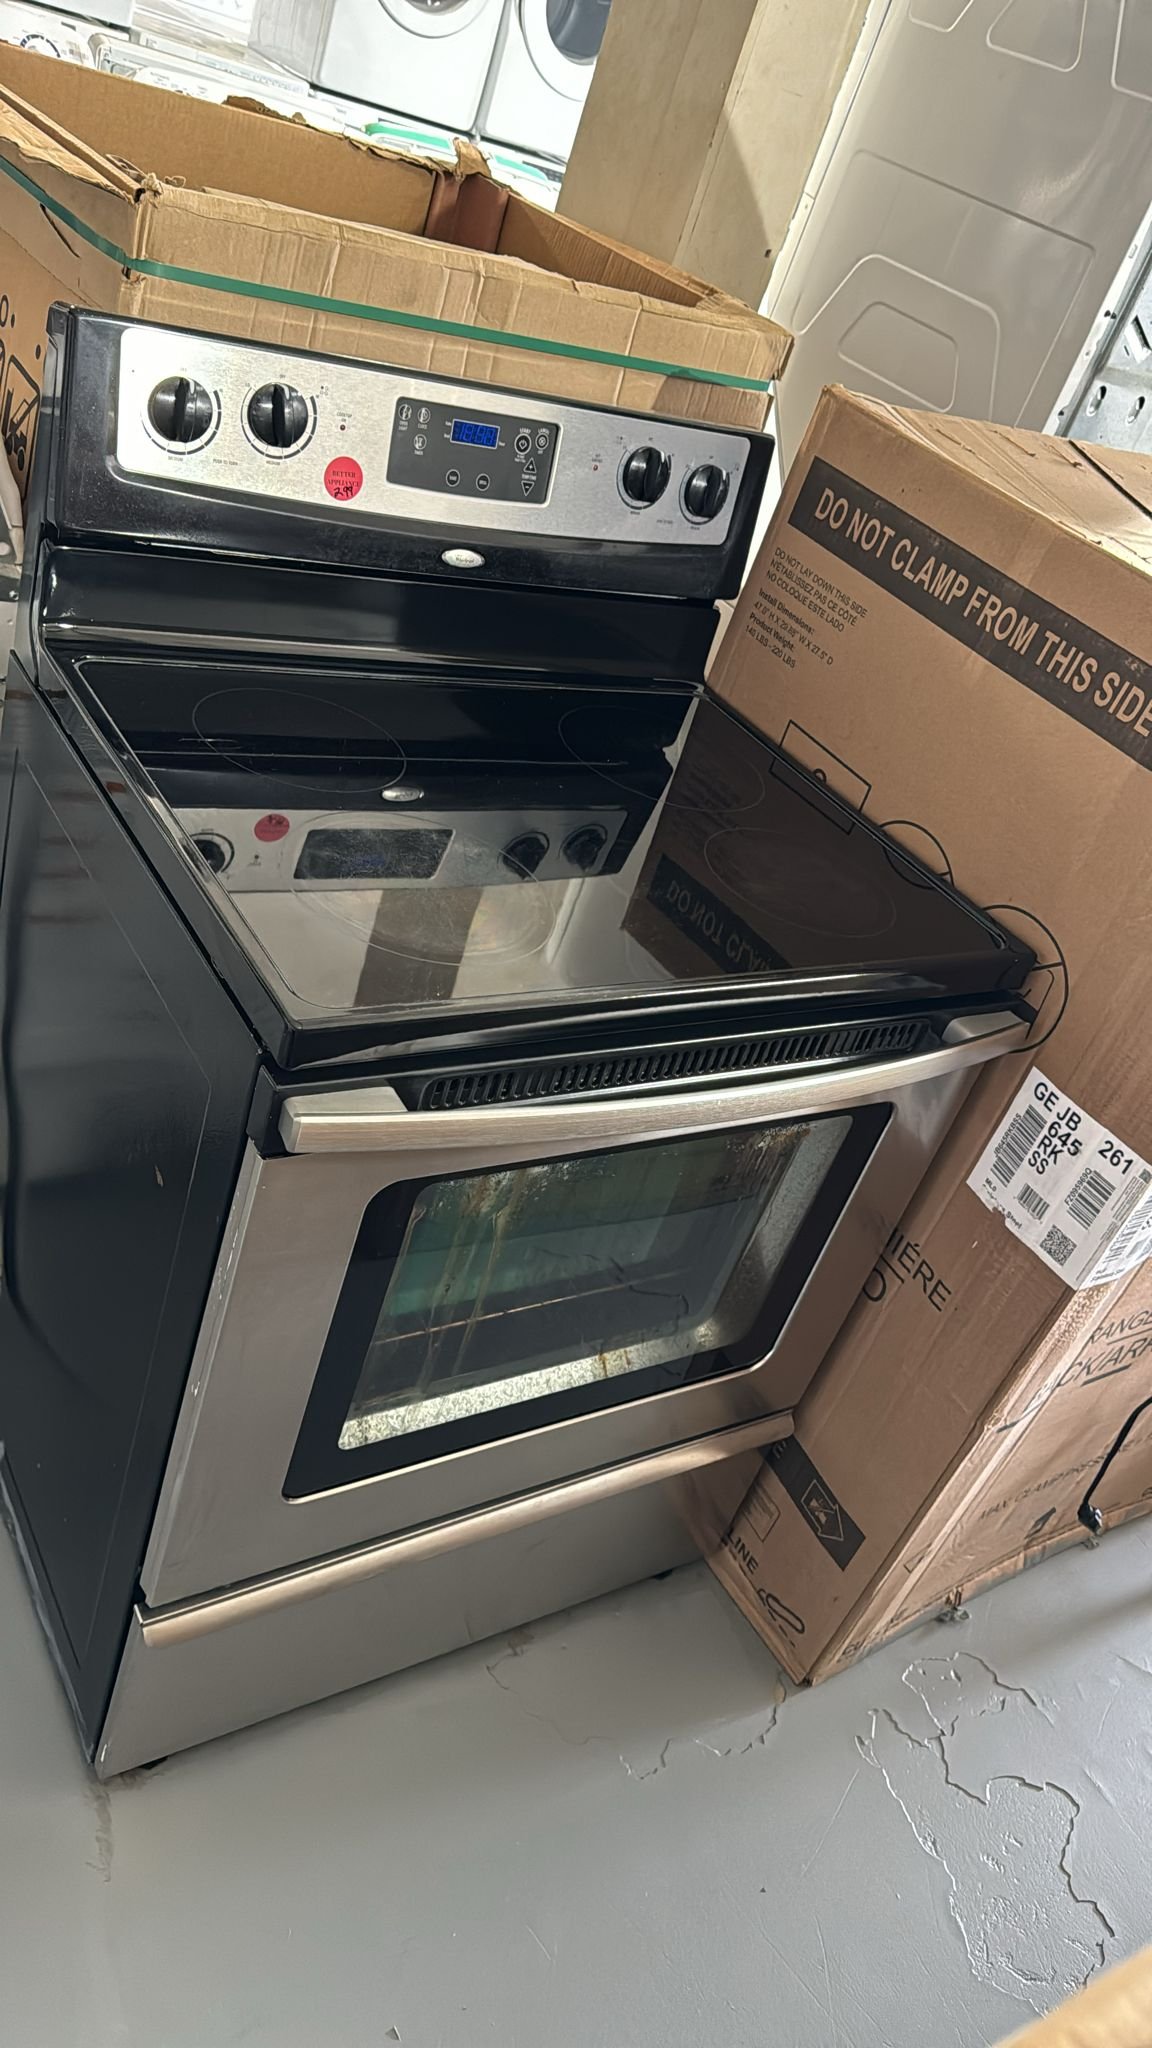 Whirlpool Electric Range Freestanding ( Used ) – Stainless